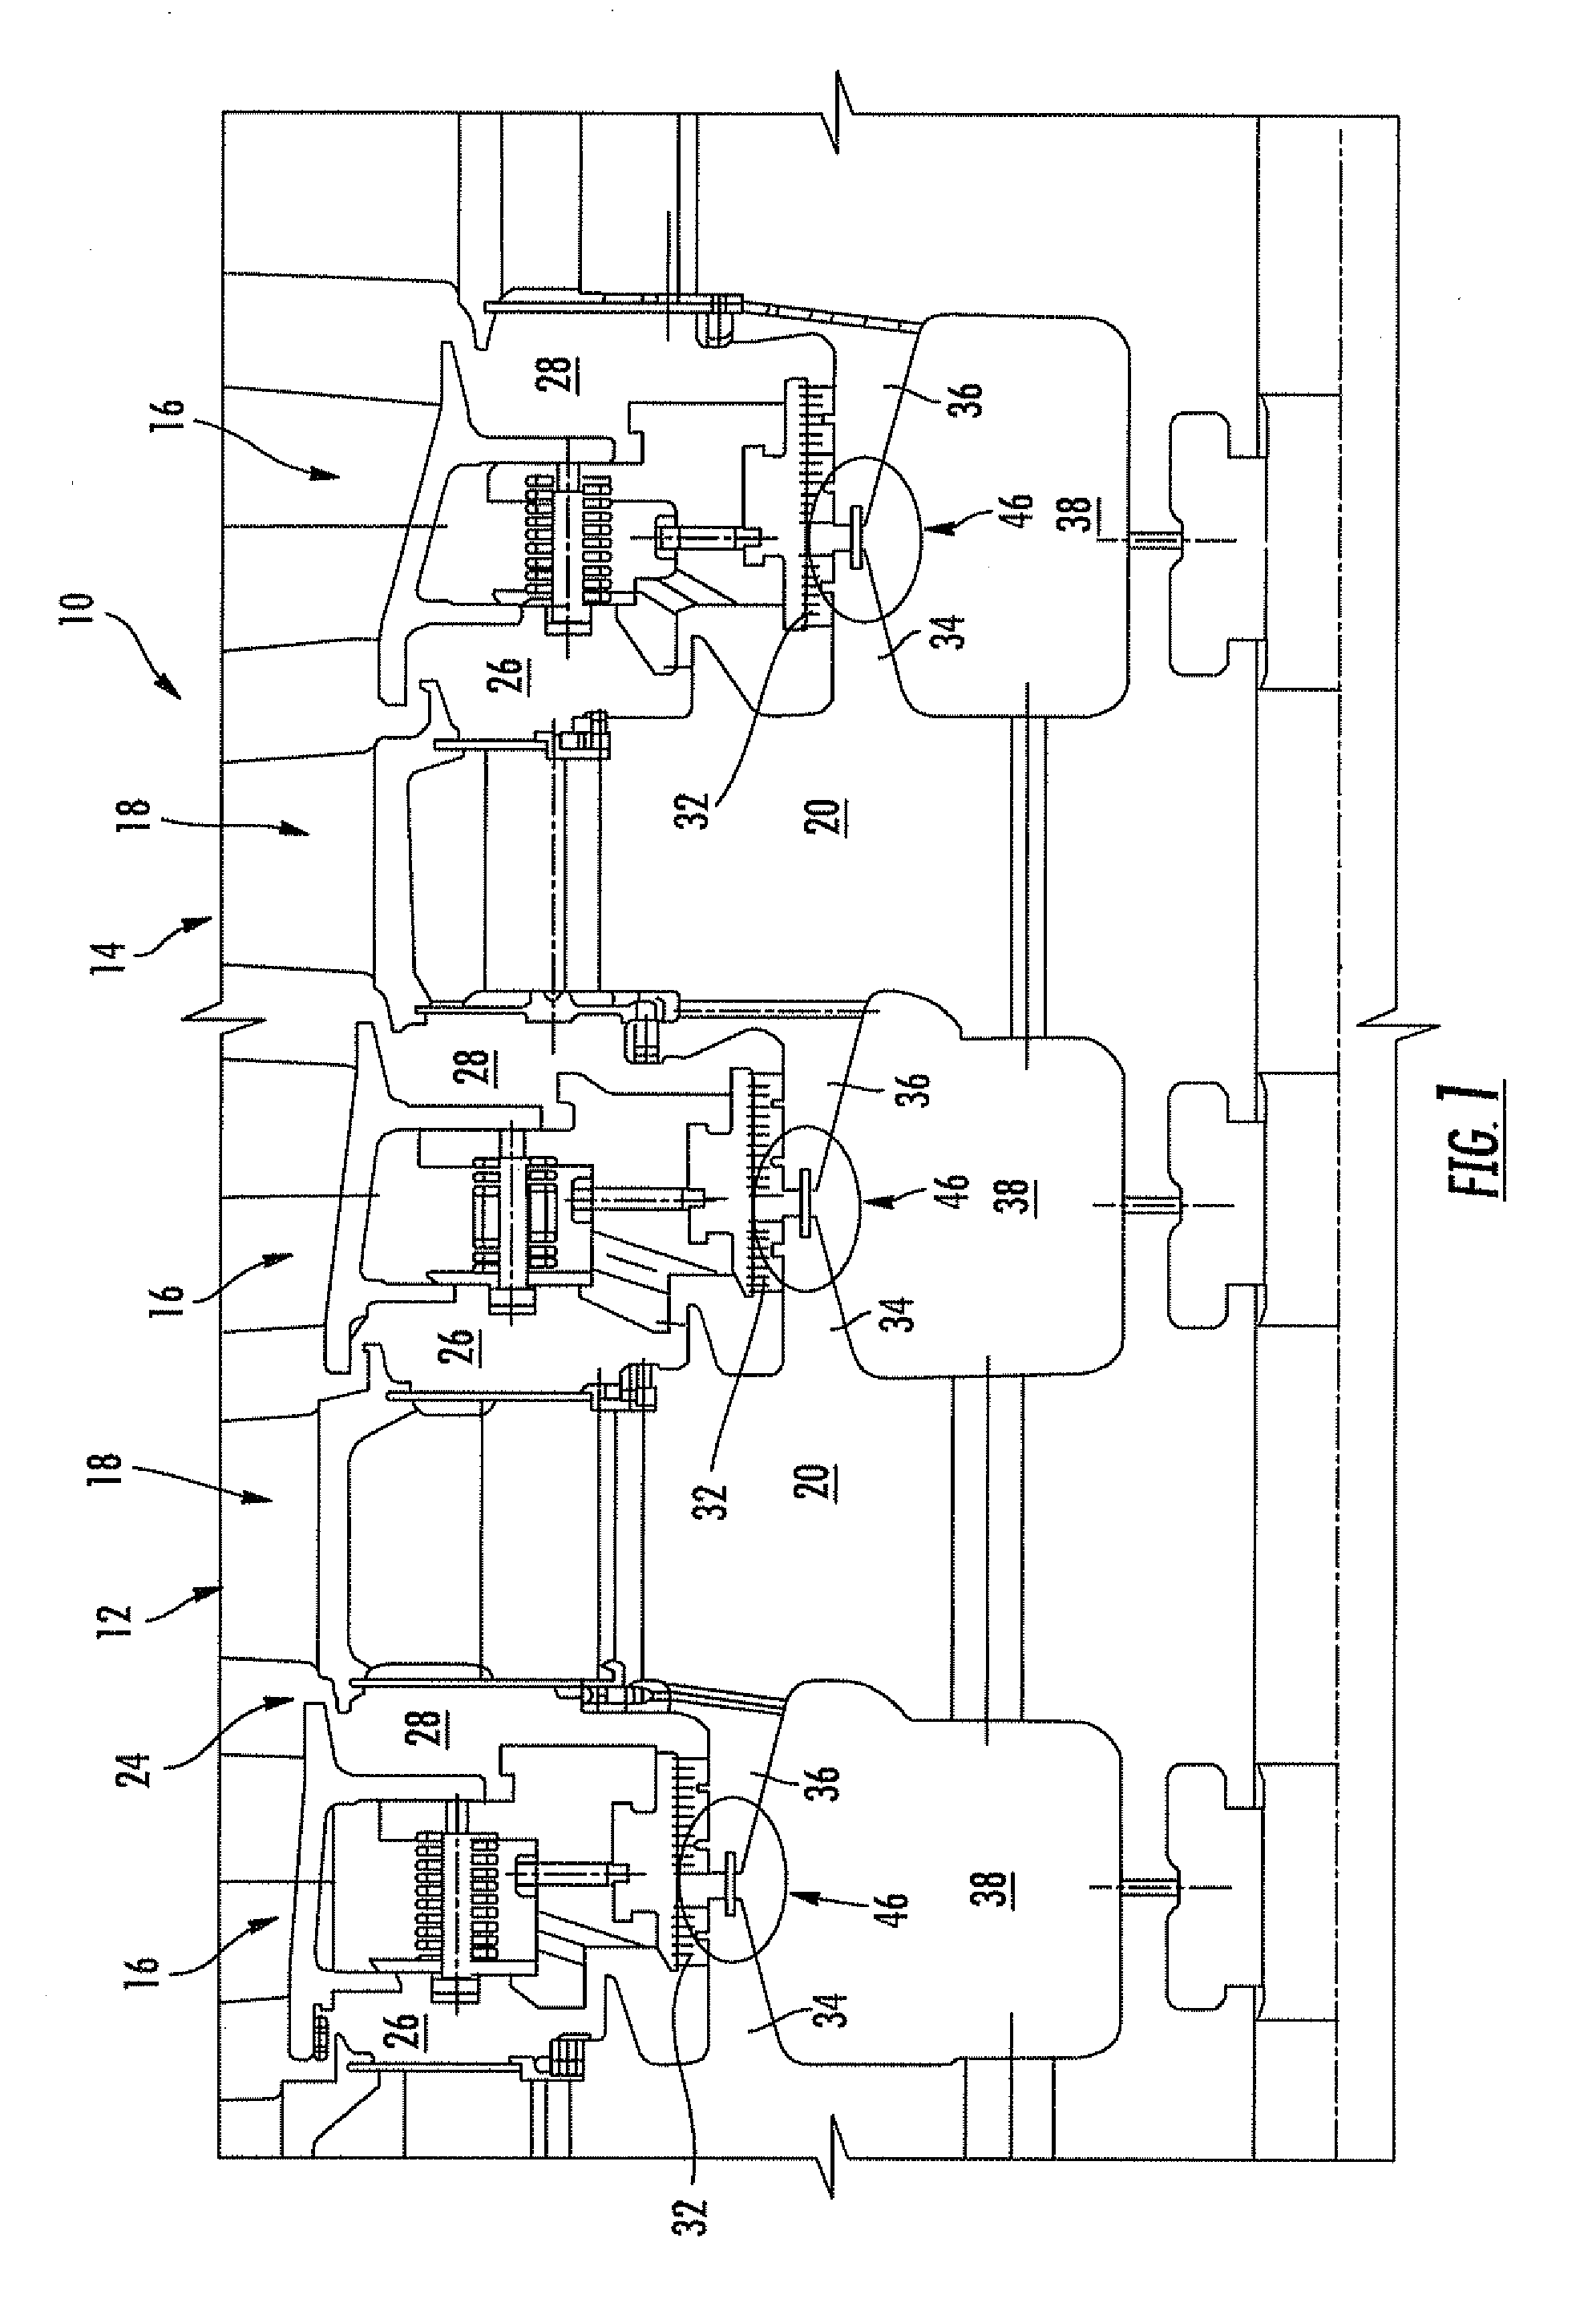 Sealing band having bendable tang with Anti-rotation in a turbine and associated methods